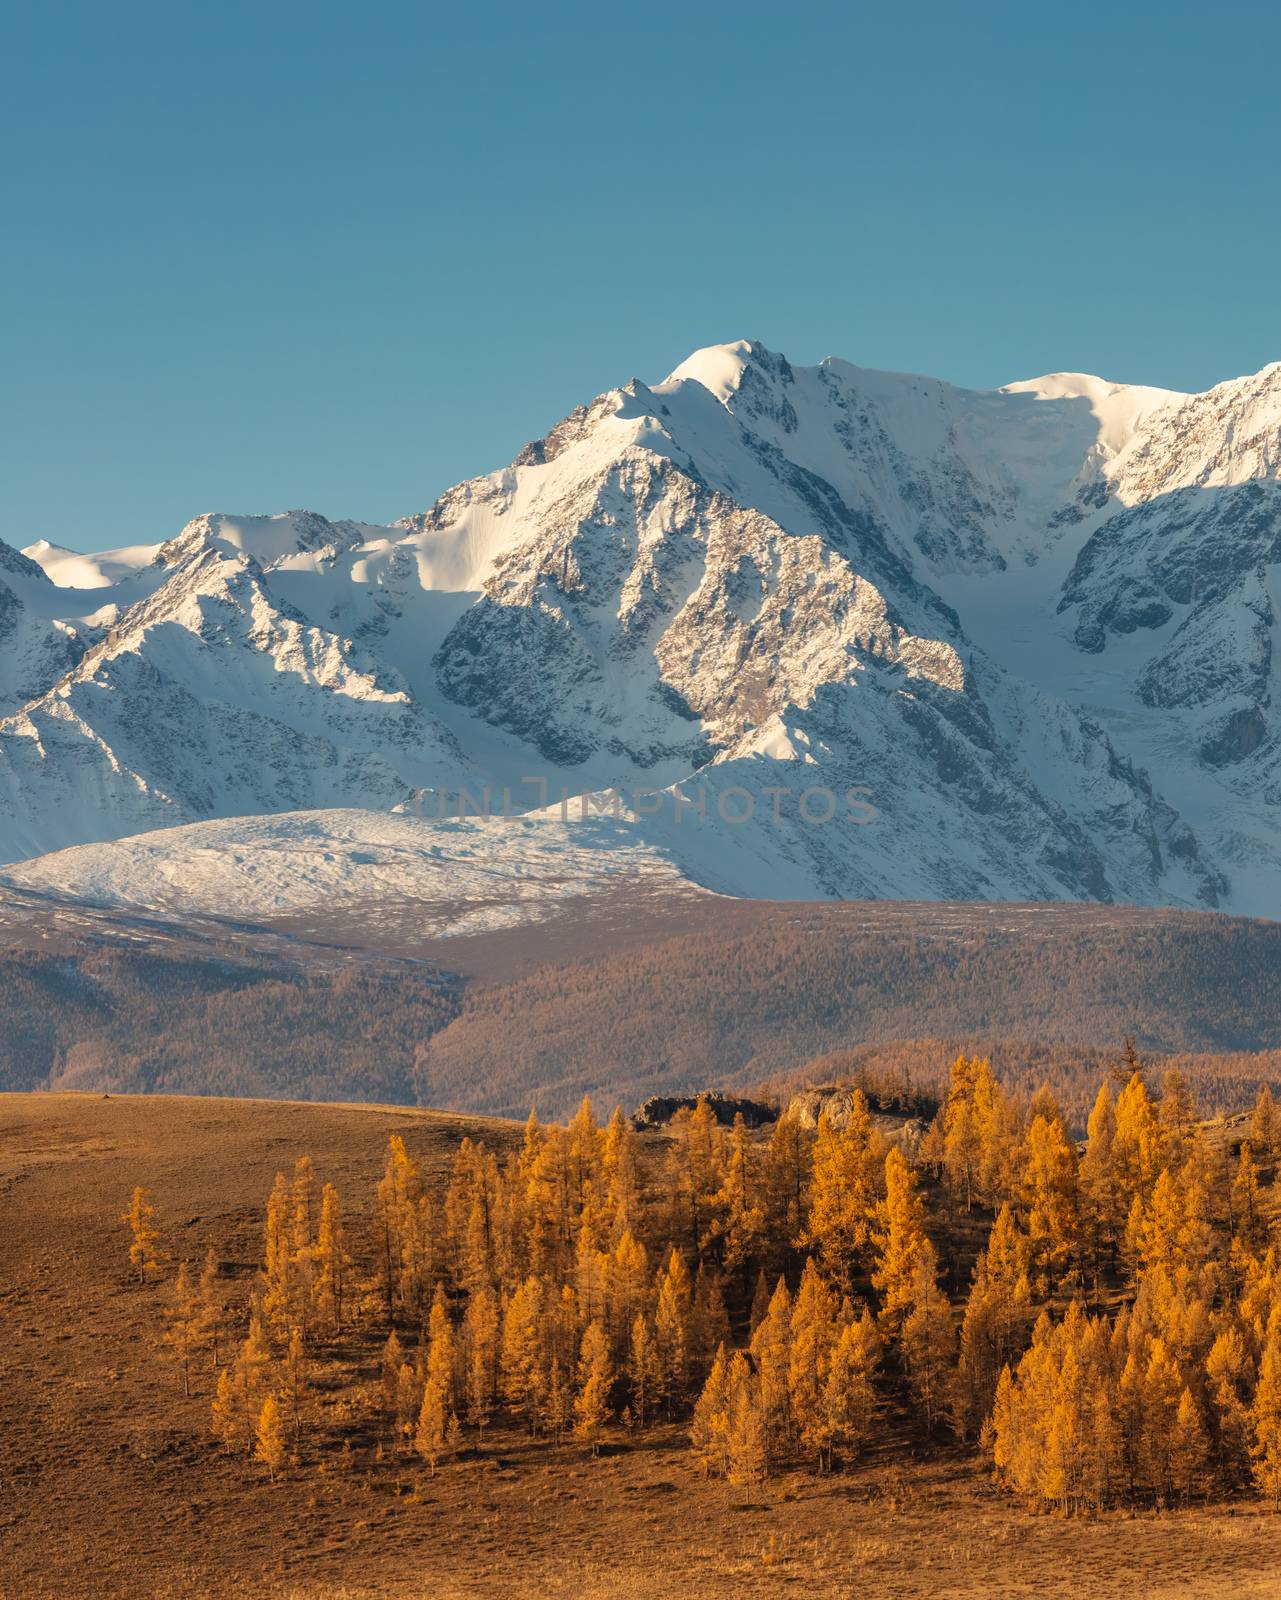 Beautiful portrait size shot of a white snowy mountain and hills with trees in the foreground. Blue sky as a background. Fall time. Sunrise. Golden hour. Altai mountains, Russia.